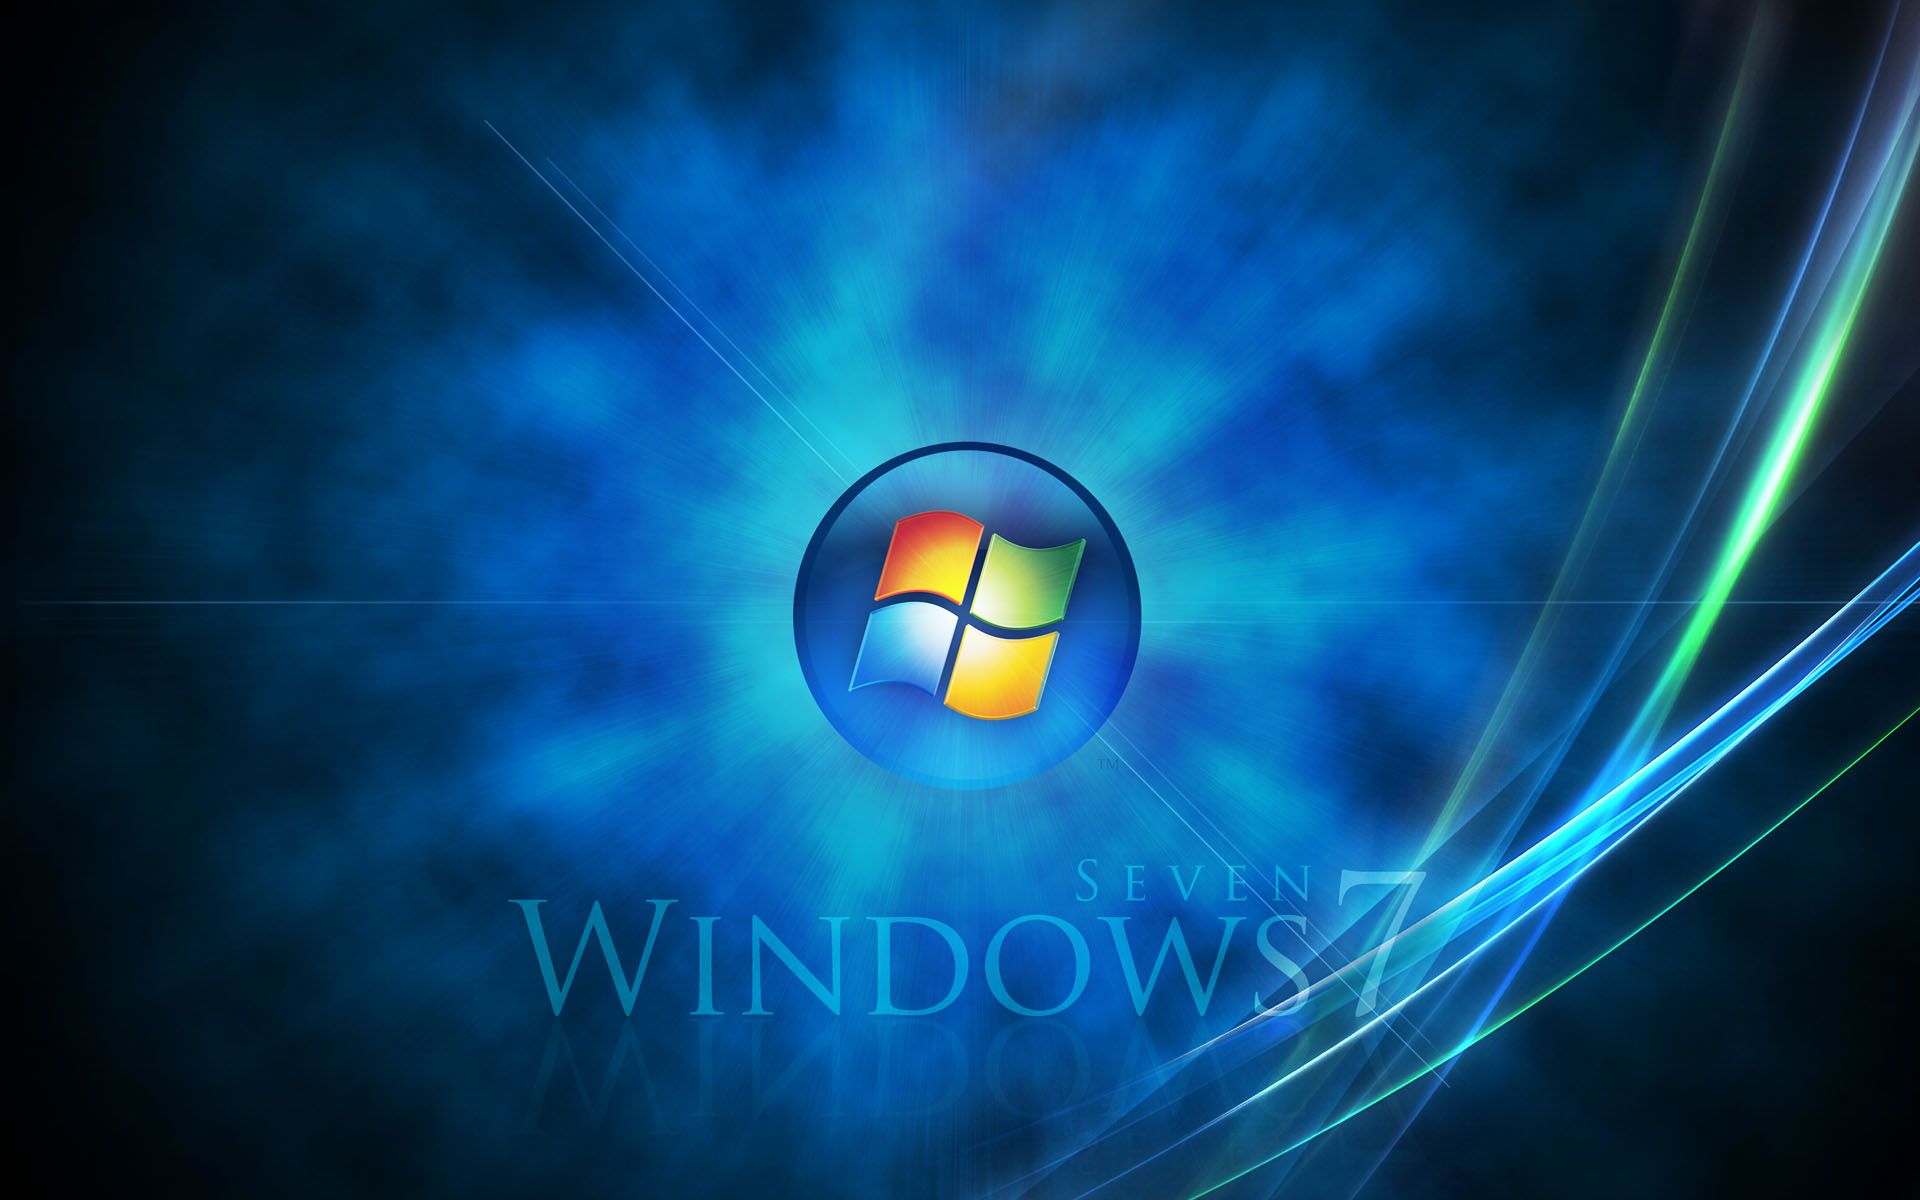 Windows 7 - photo wallpapers, pictures for Windows 7 / Page 7